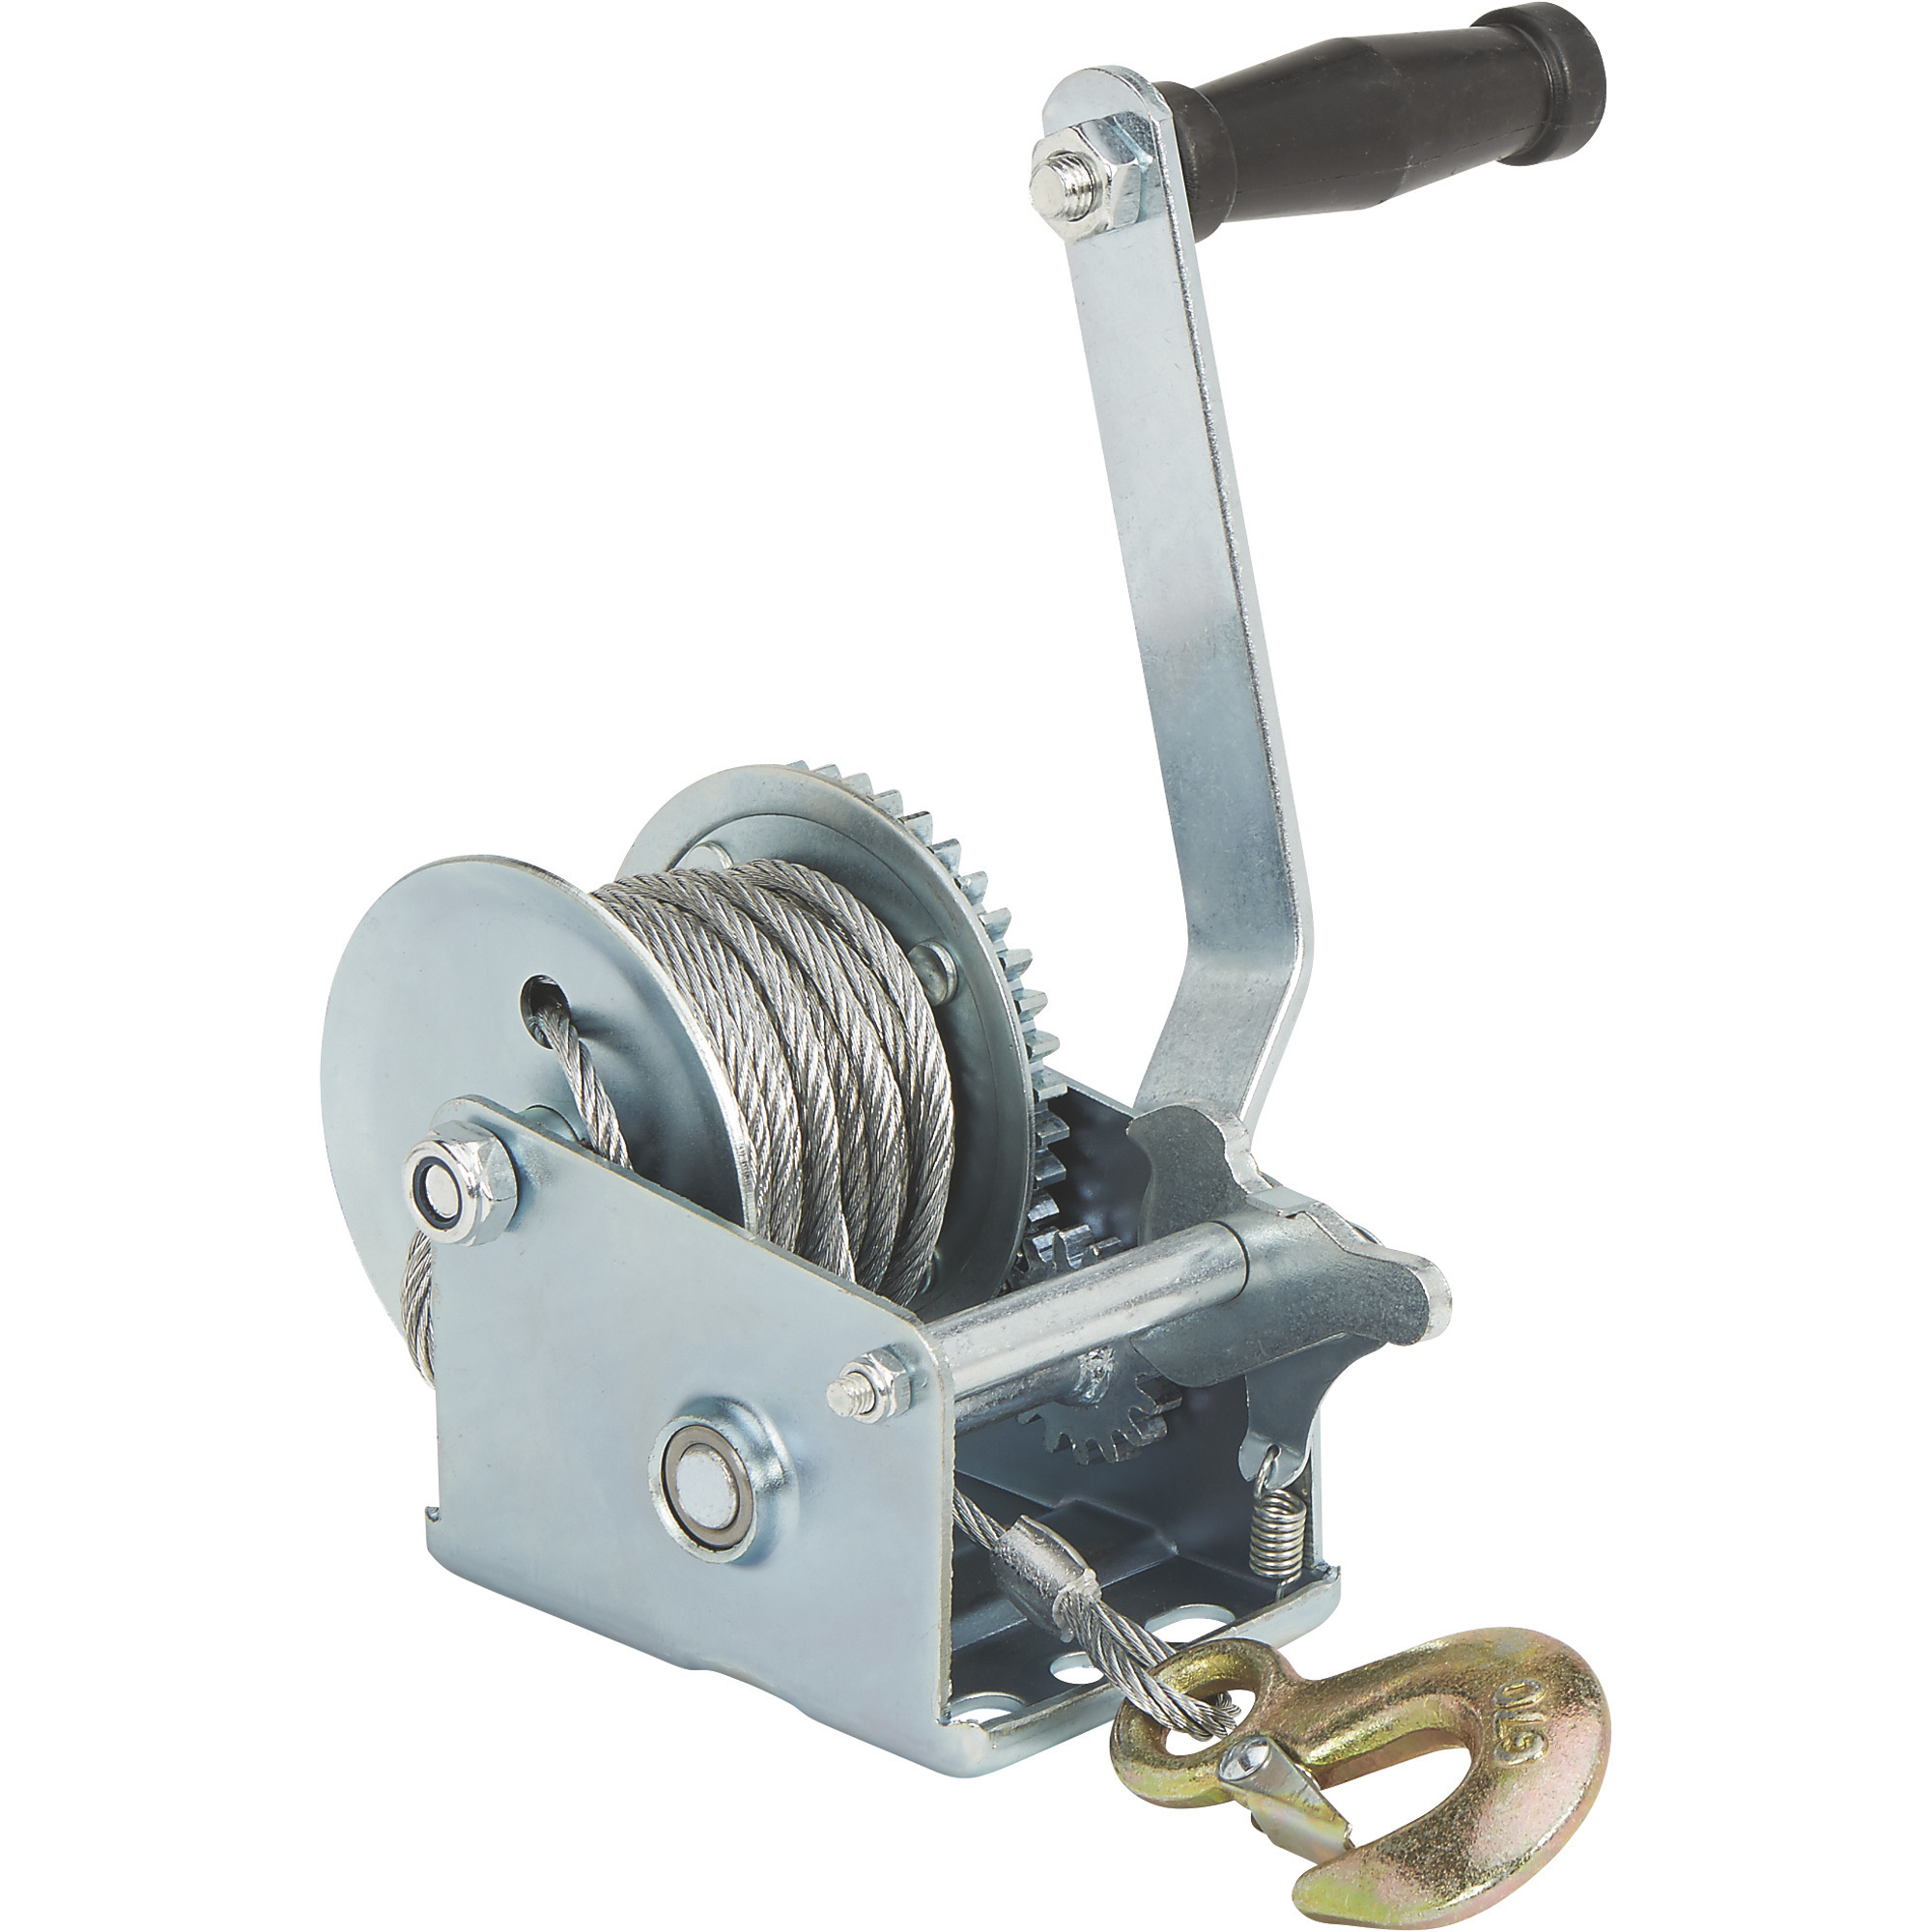 Ultra-Tow Single Speed Hand Winch with Wire Rope, 600-Lb. Load